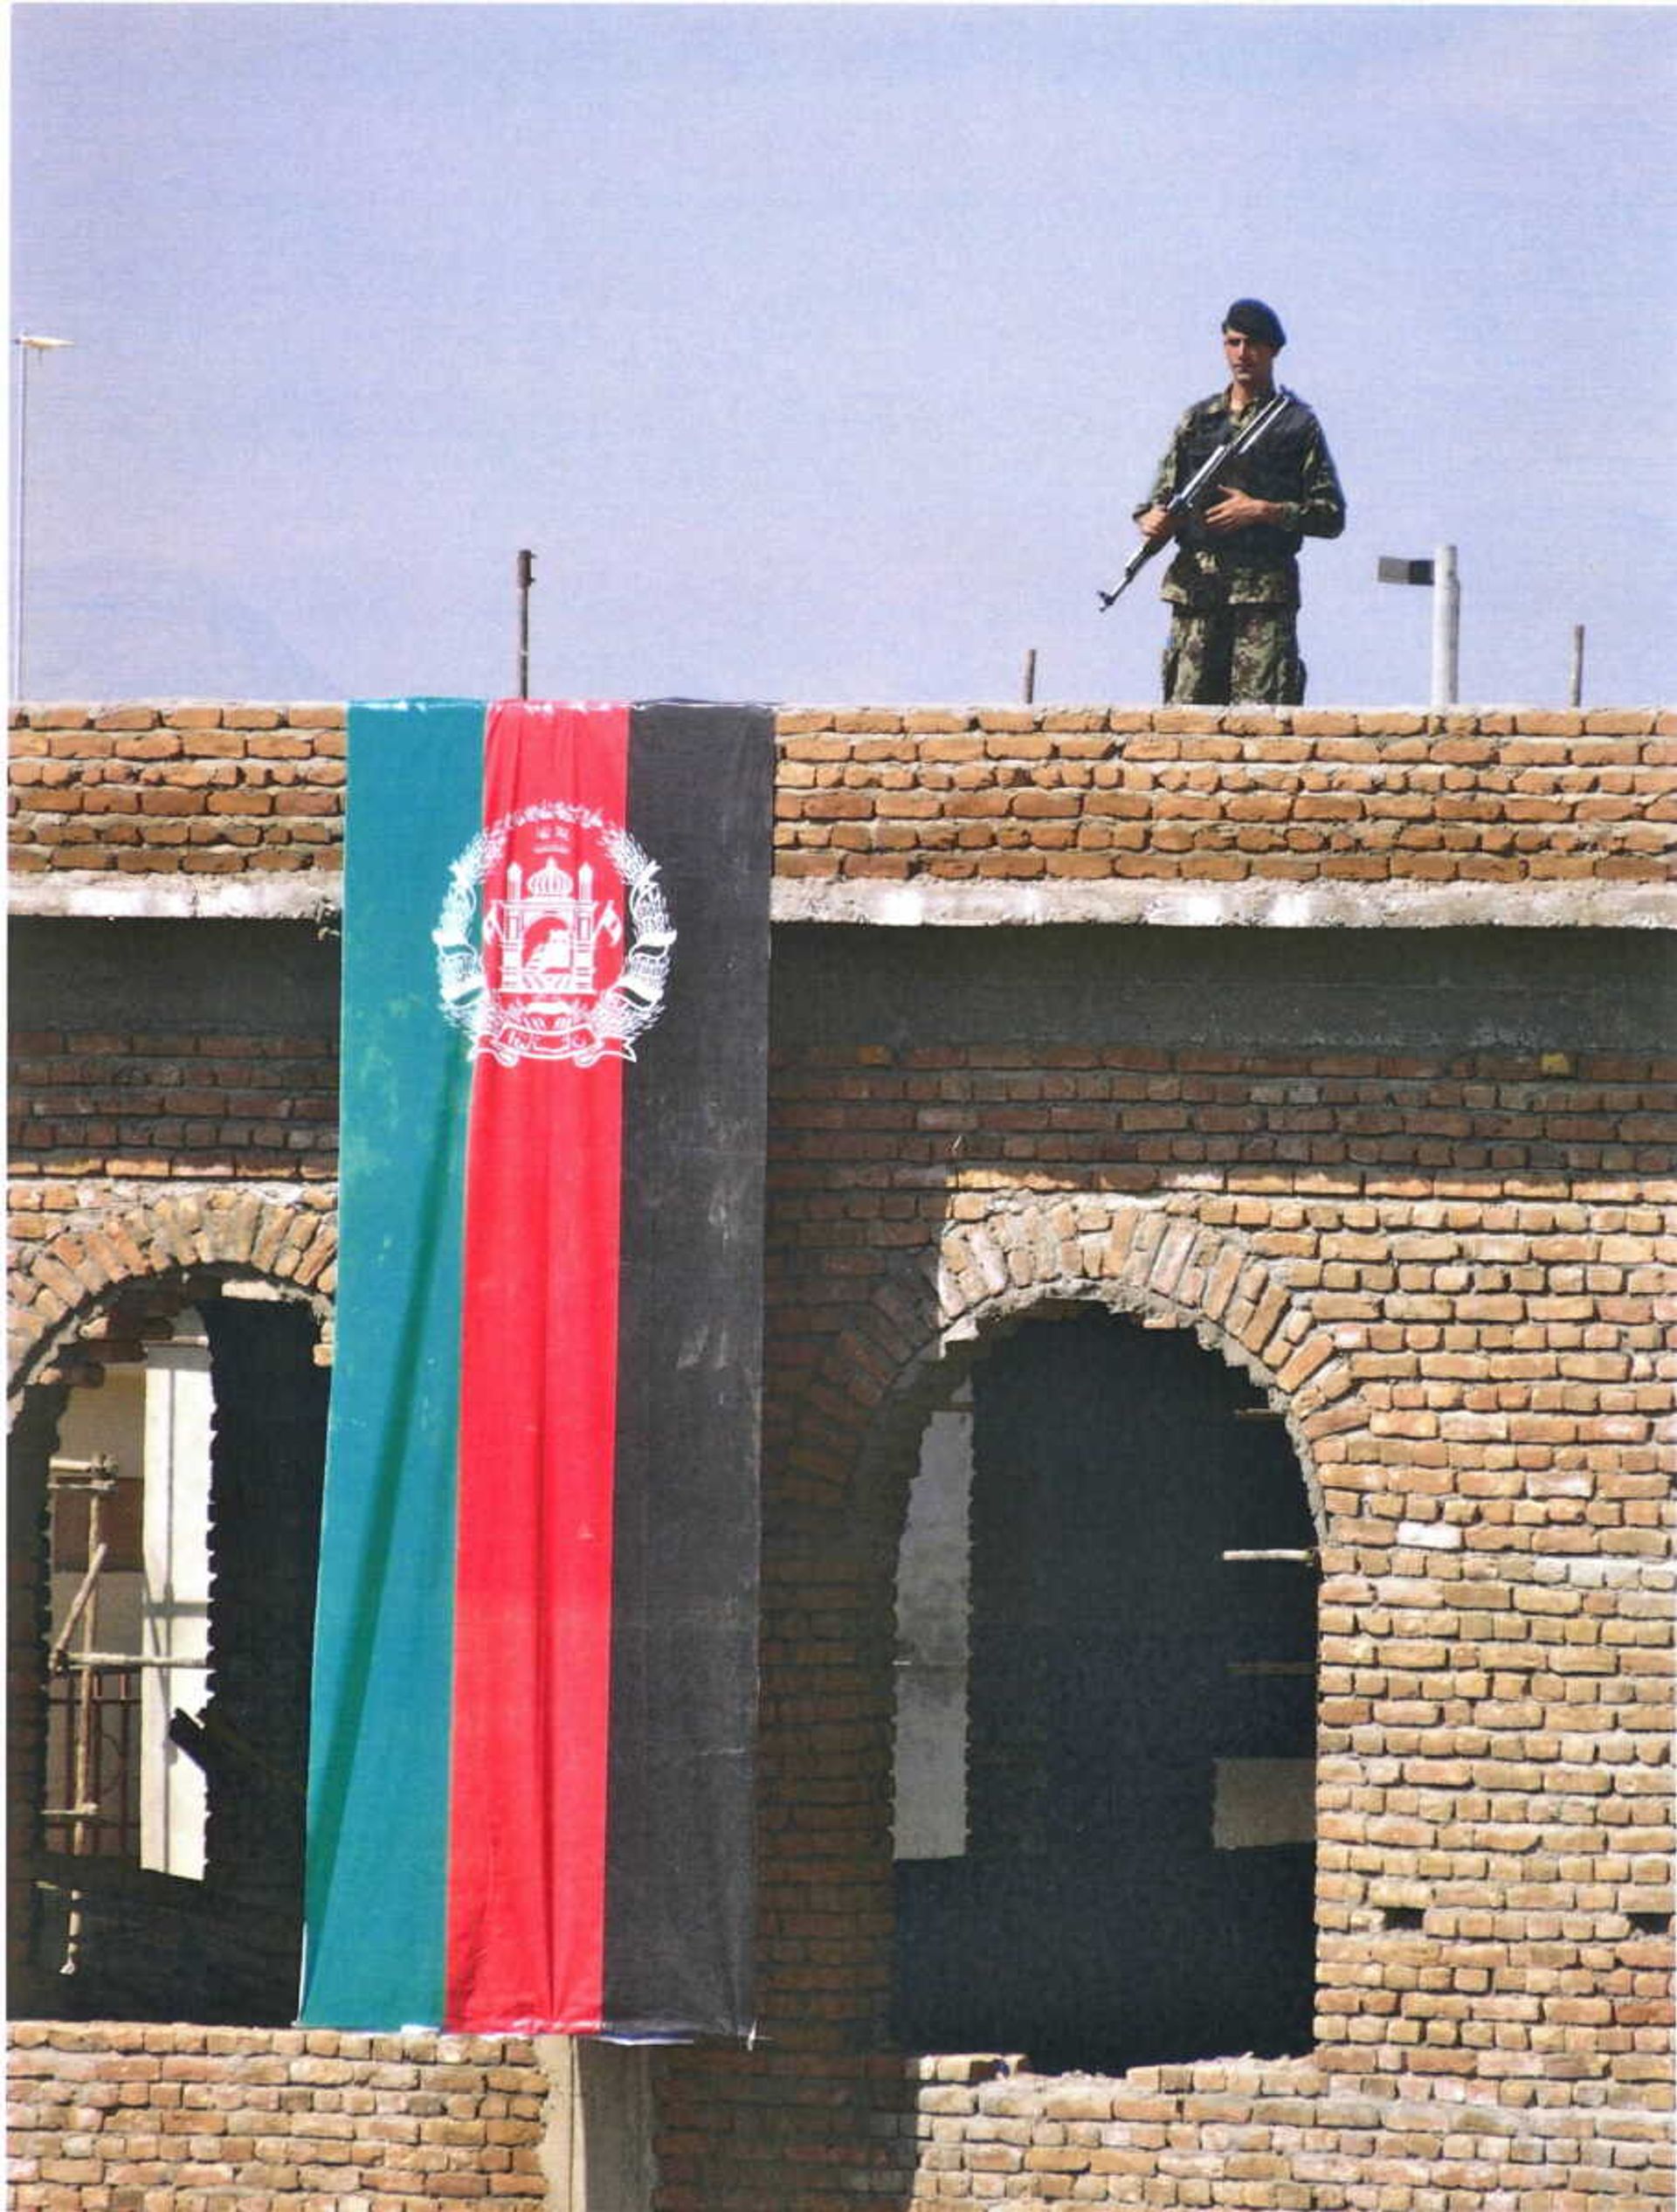  A guard watches a temple in Afghanistan.  Submitted photo